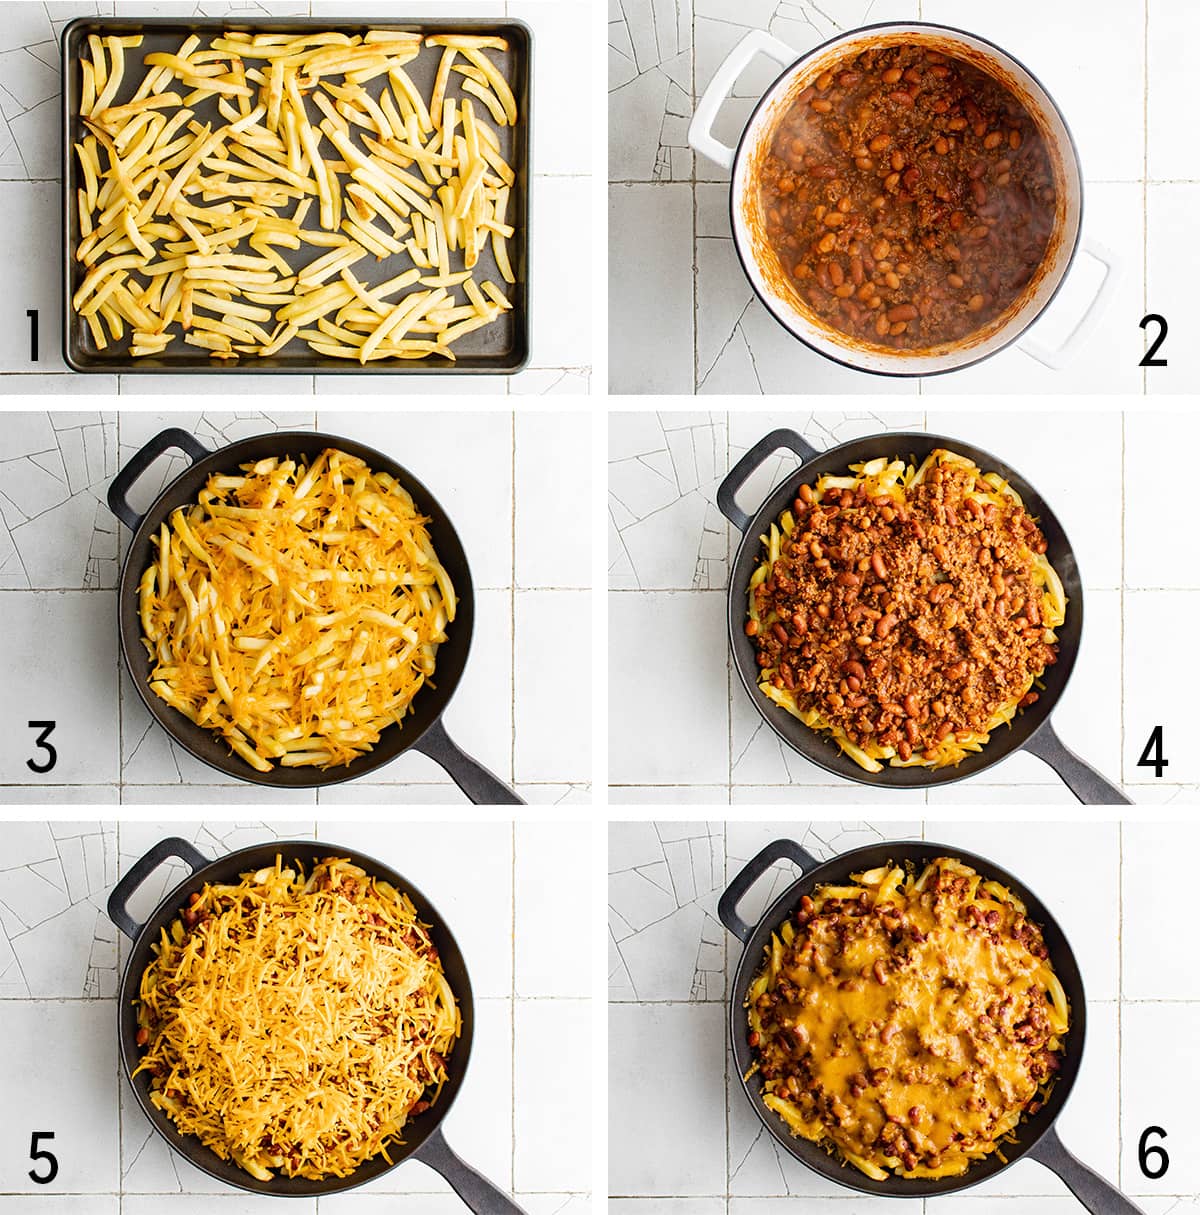 Collage of images showing how to make chili cheese fries. 